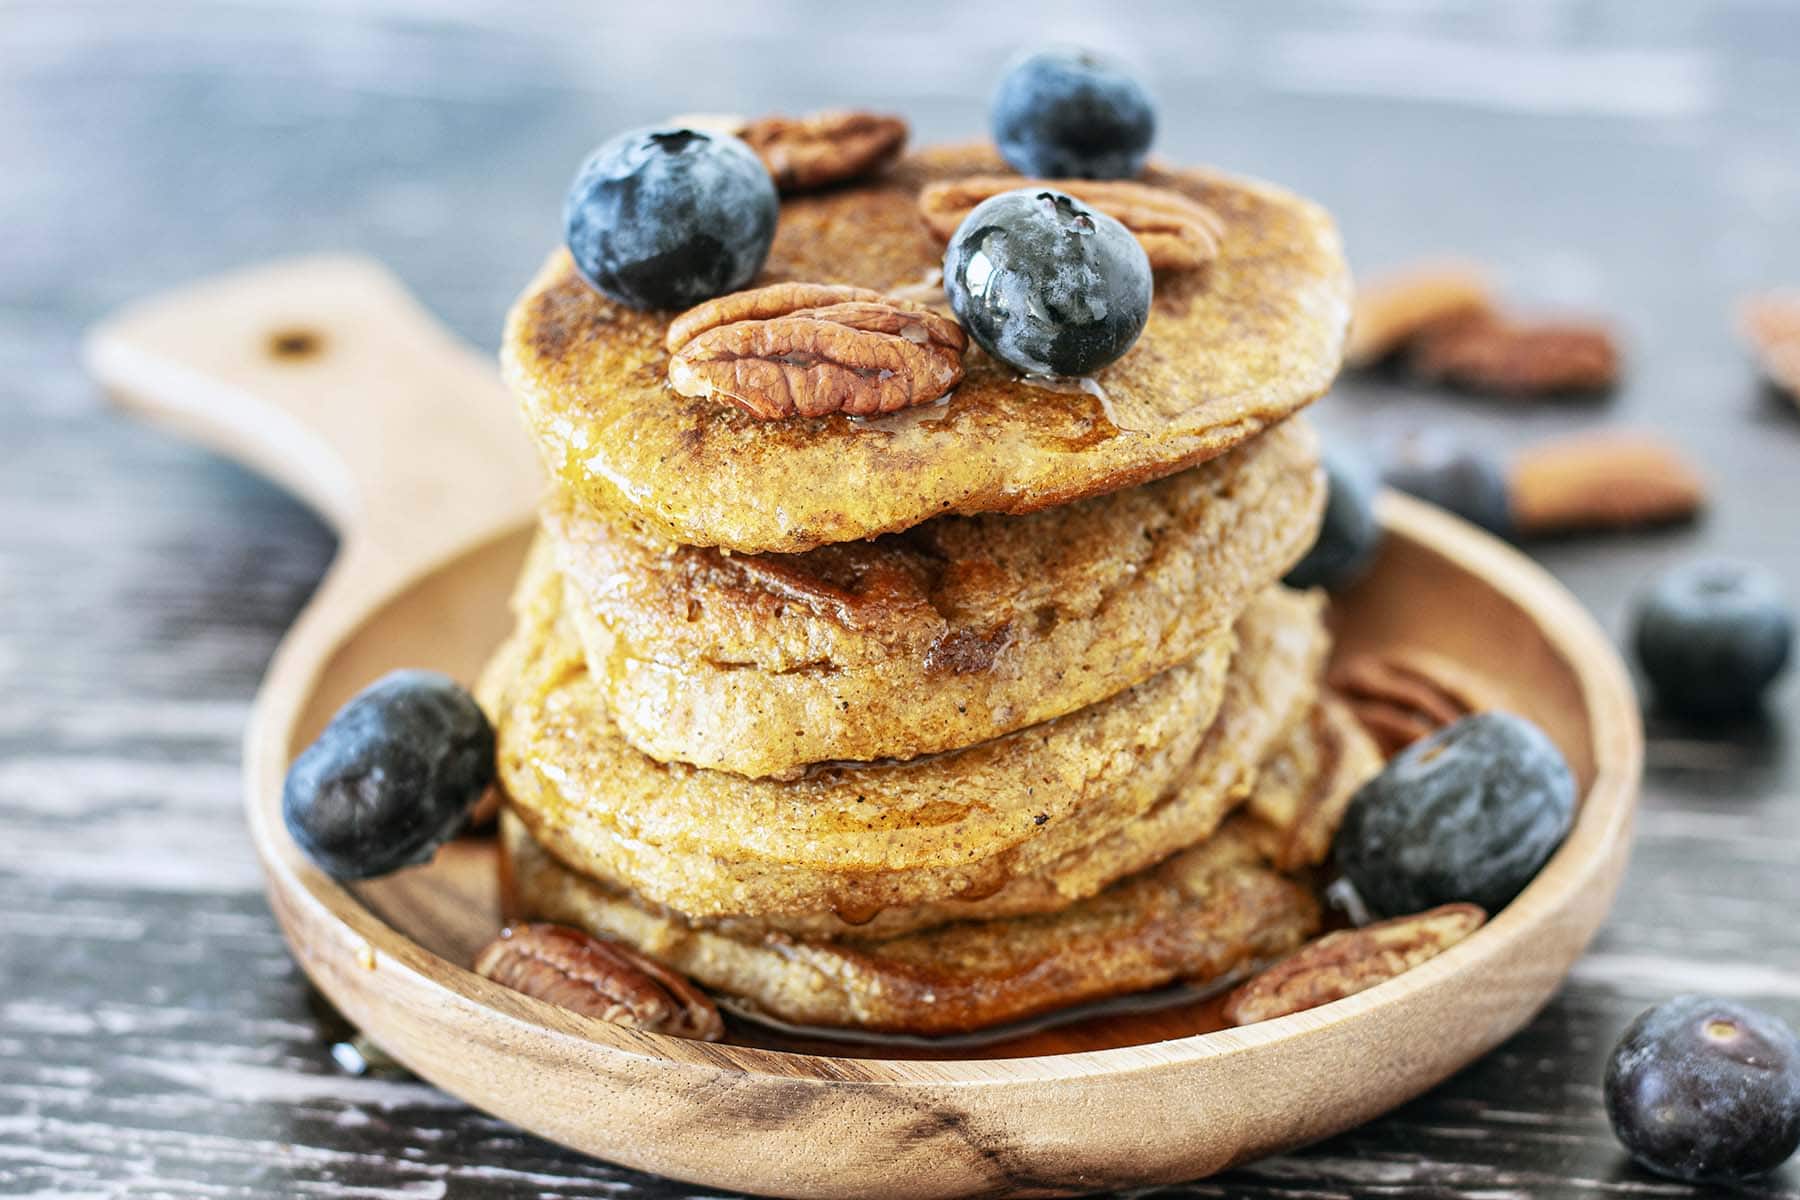 stack of butternut squash pancakes with pecans and blueberries